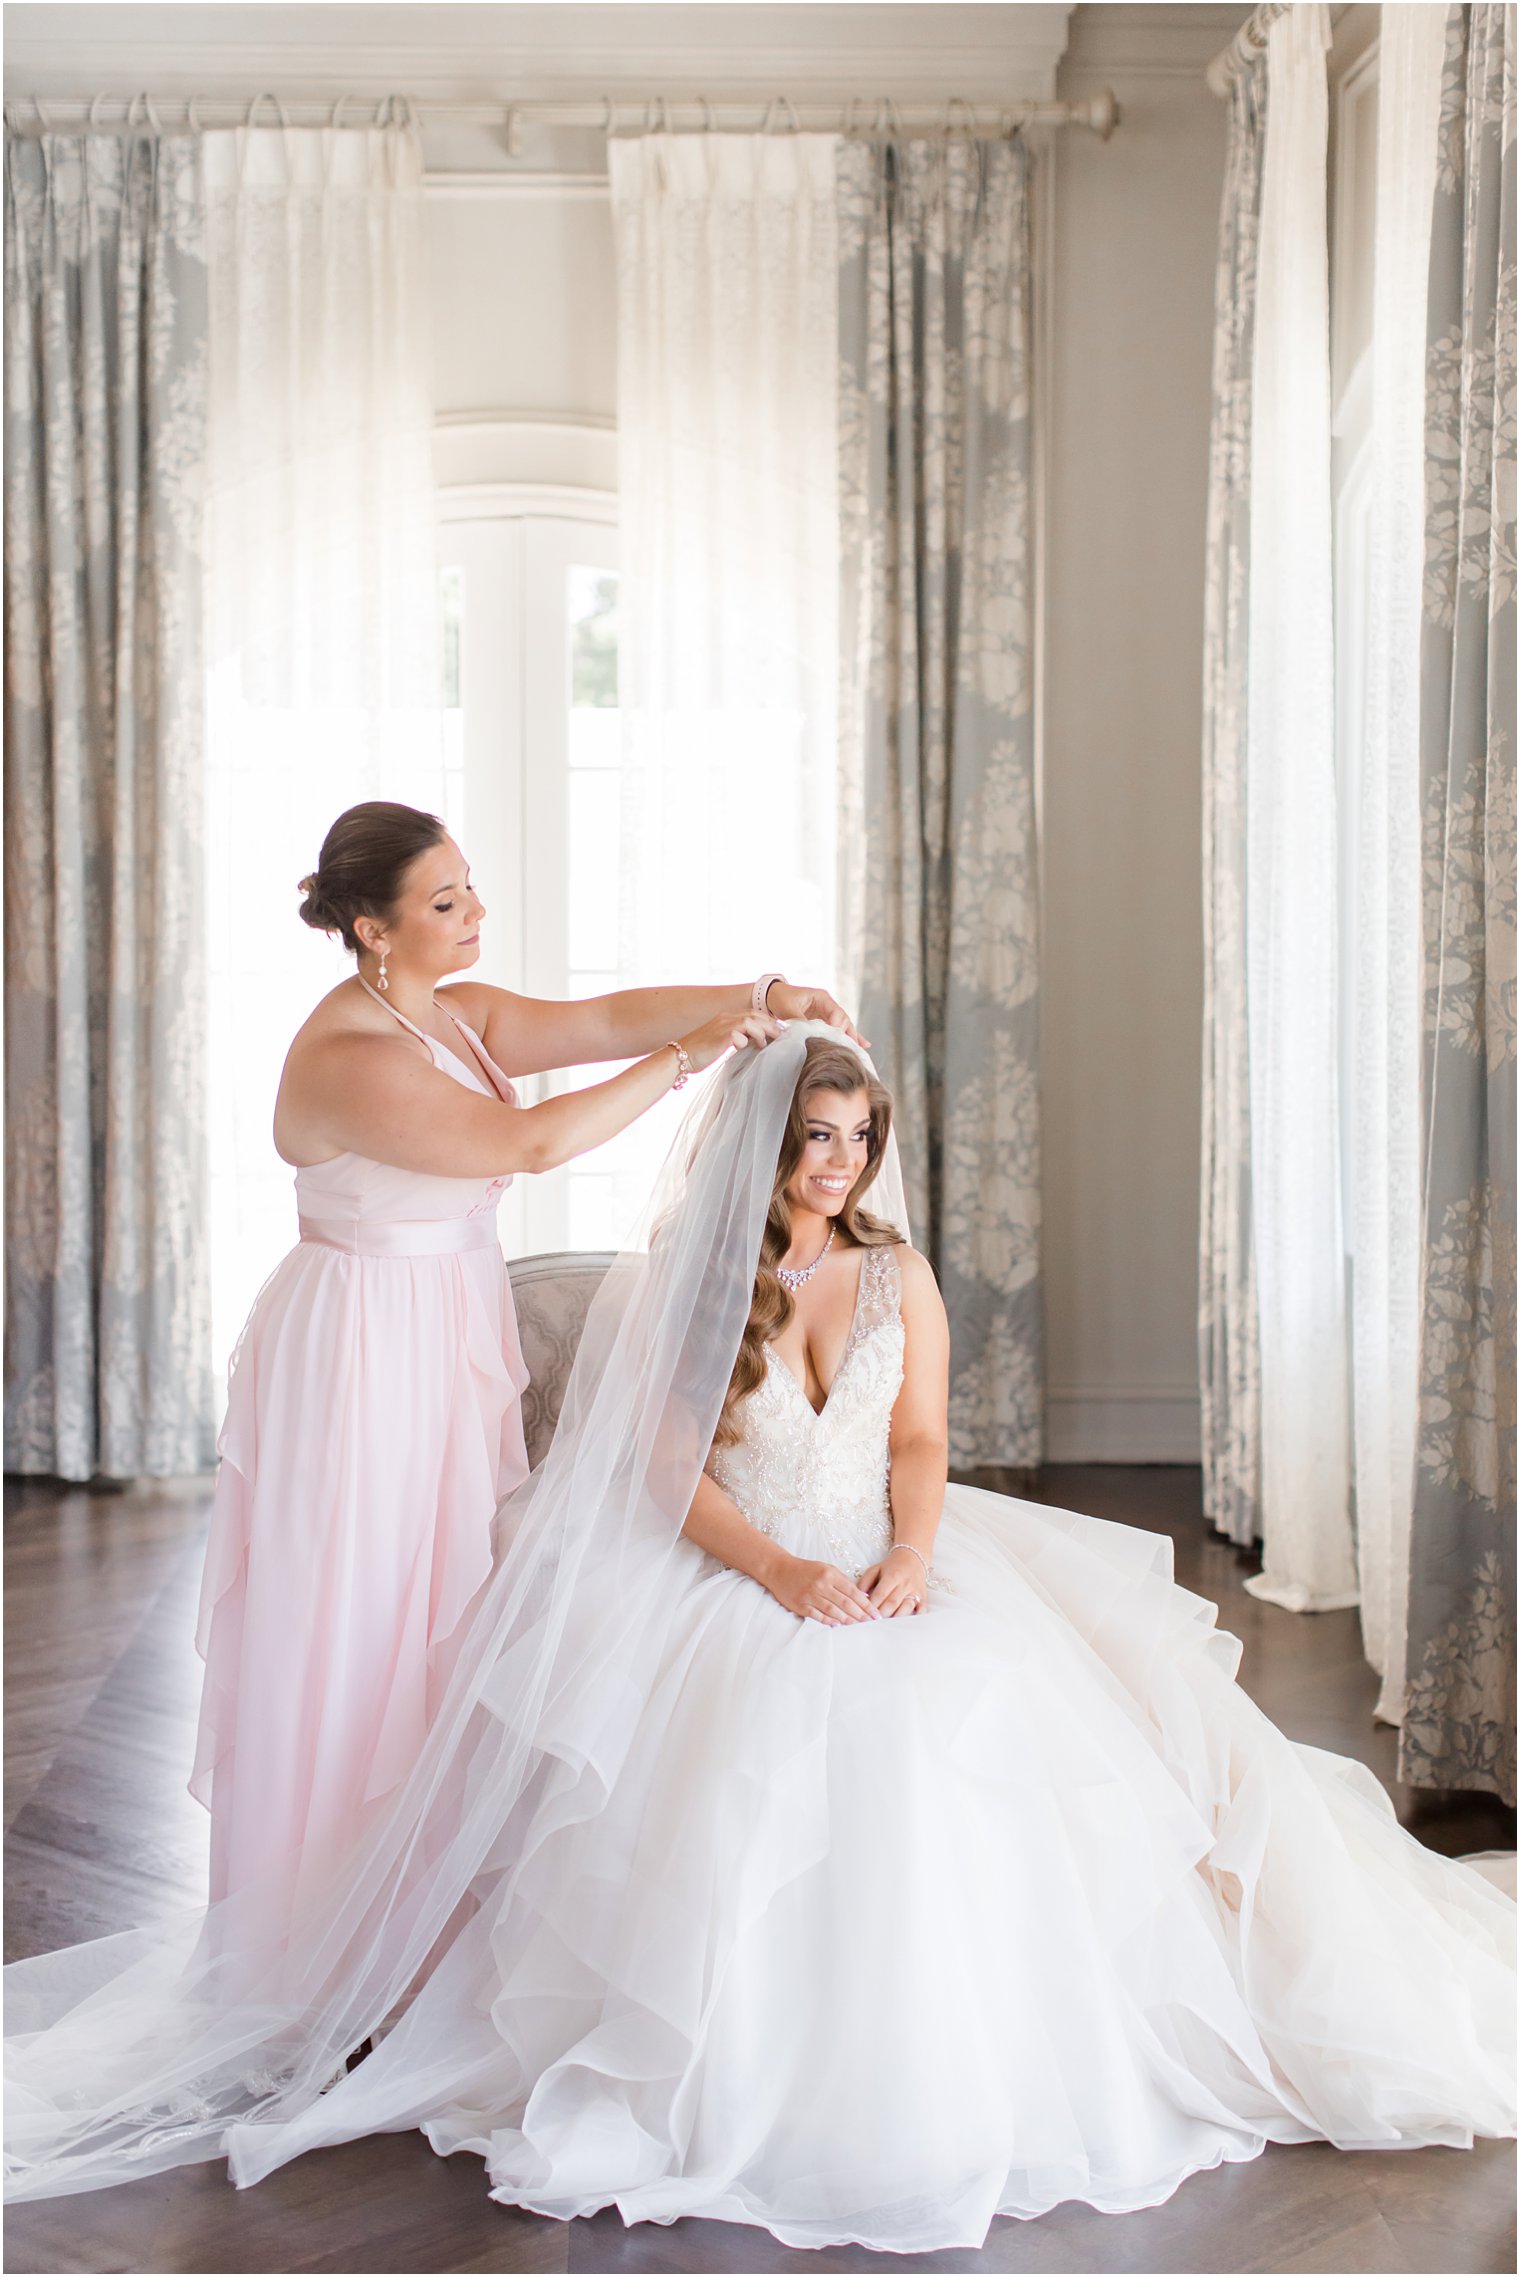 Maid of honor putting on bride's cathedral veil at Park Chateau Estate